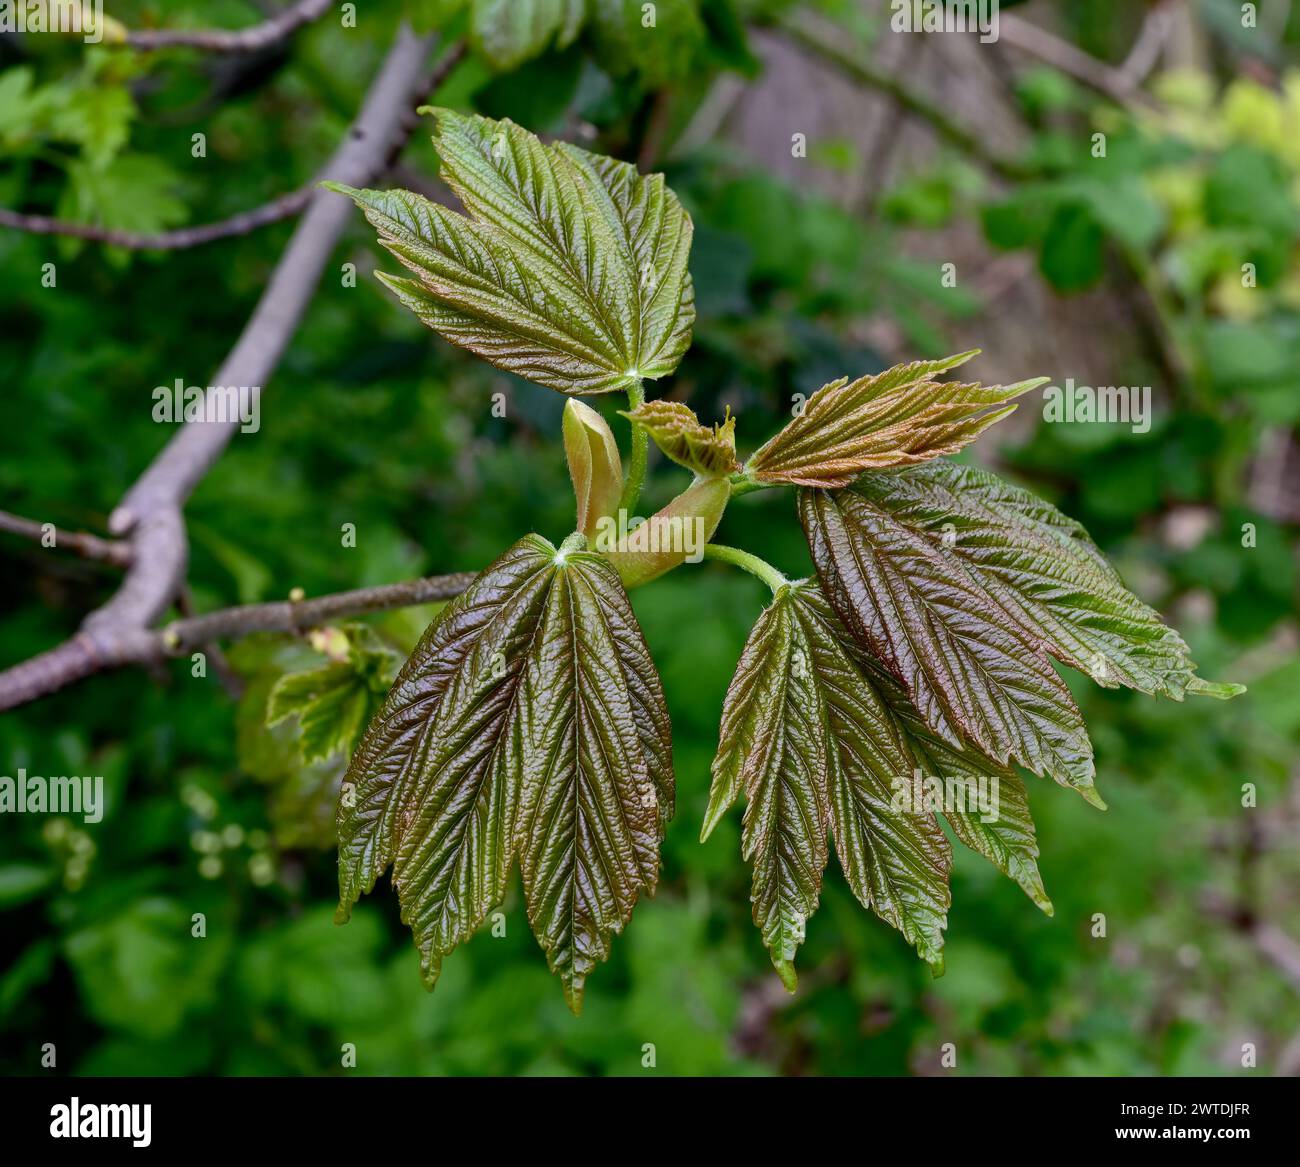 bud and leaf of Sycamore Tree resp.Acer pseudoplatanus,Rhineland,Germany Stock Photo